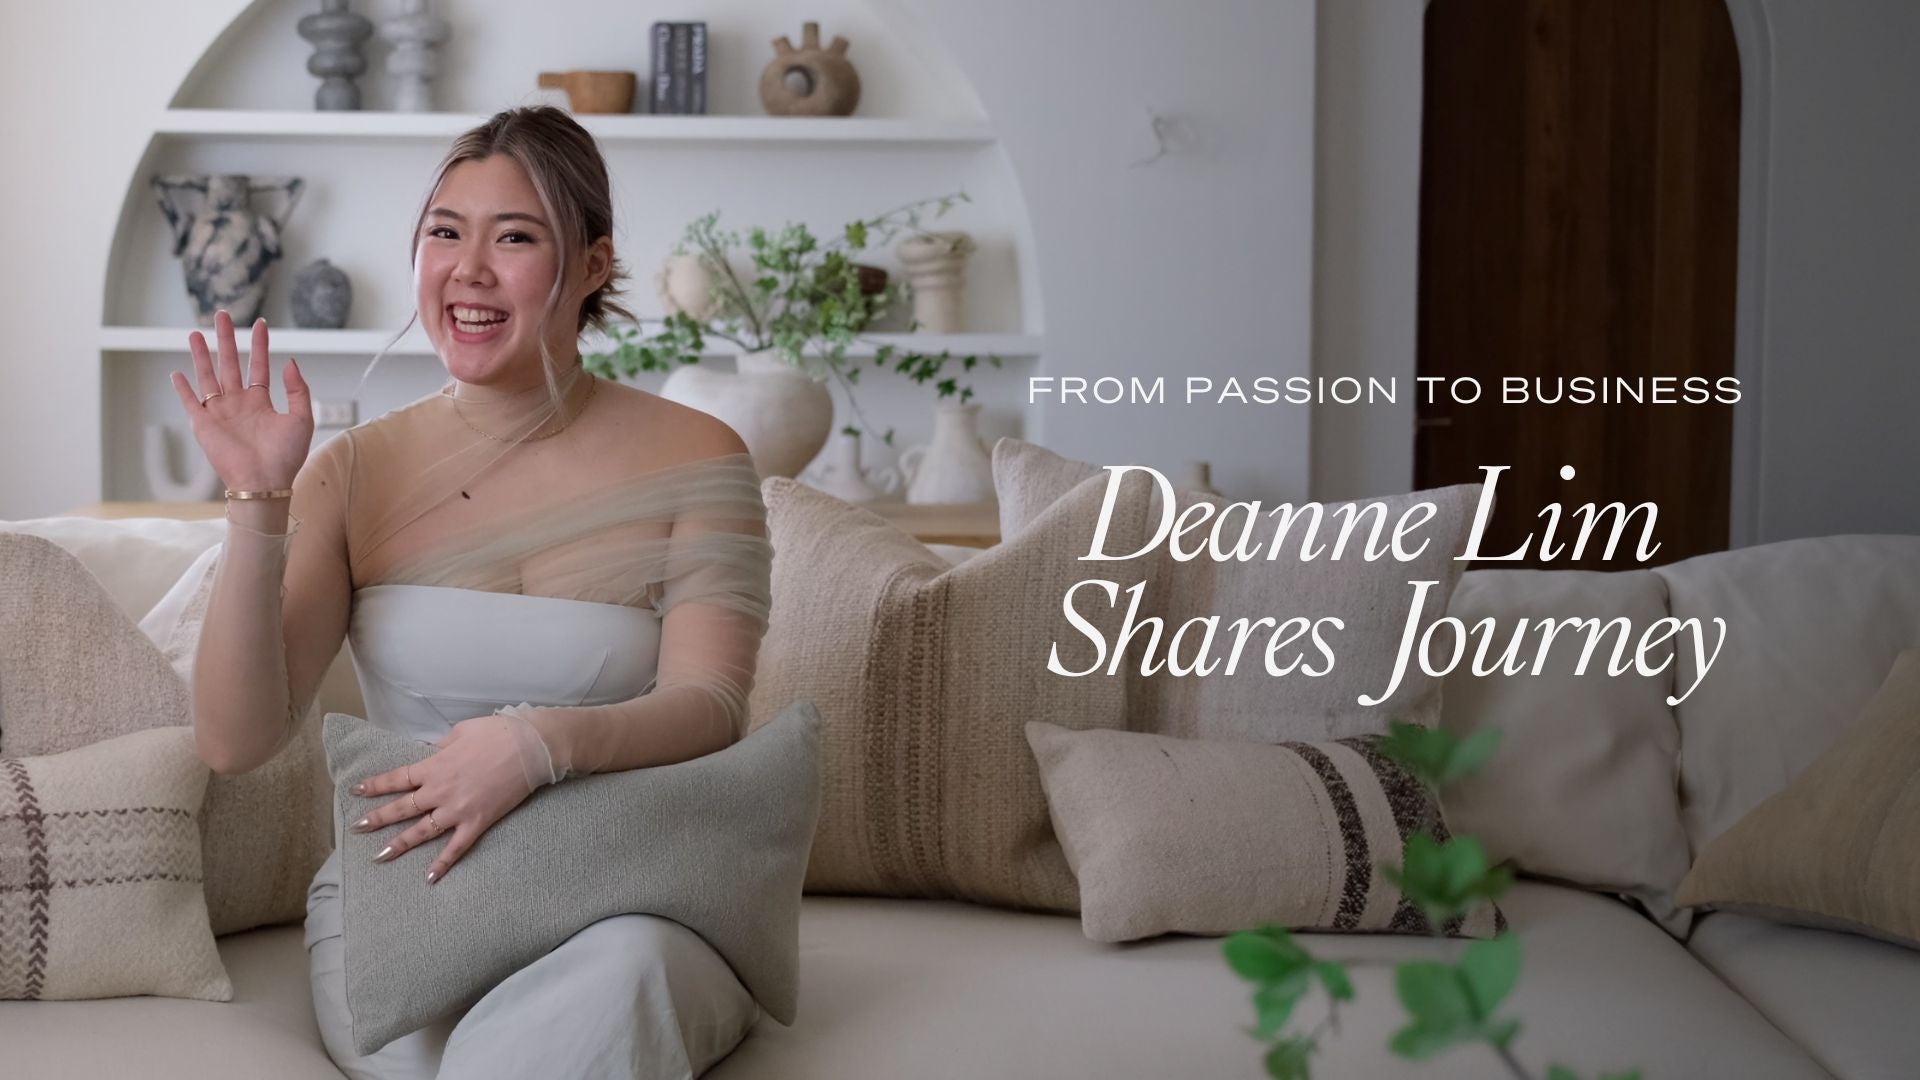 From Passion to Business: DEANNE LIM SHARES JOURNEY